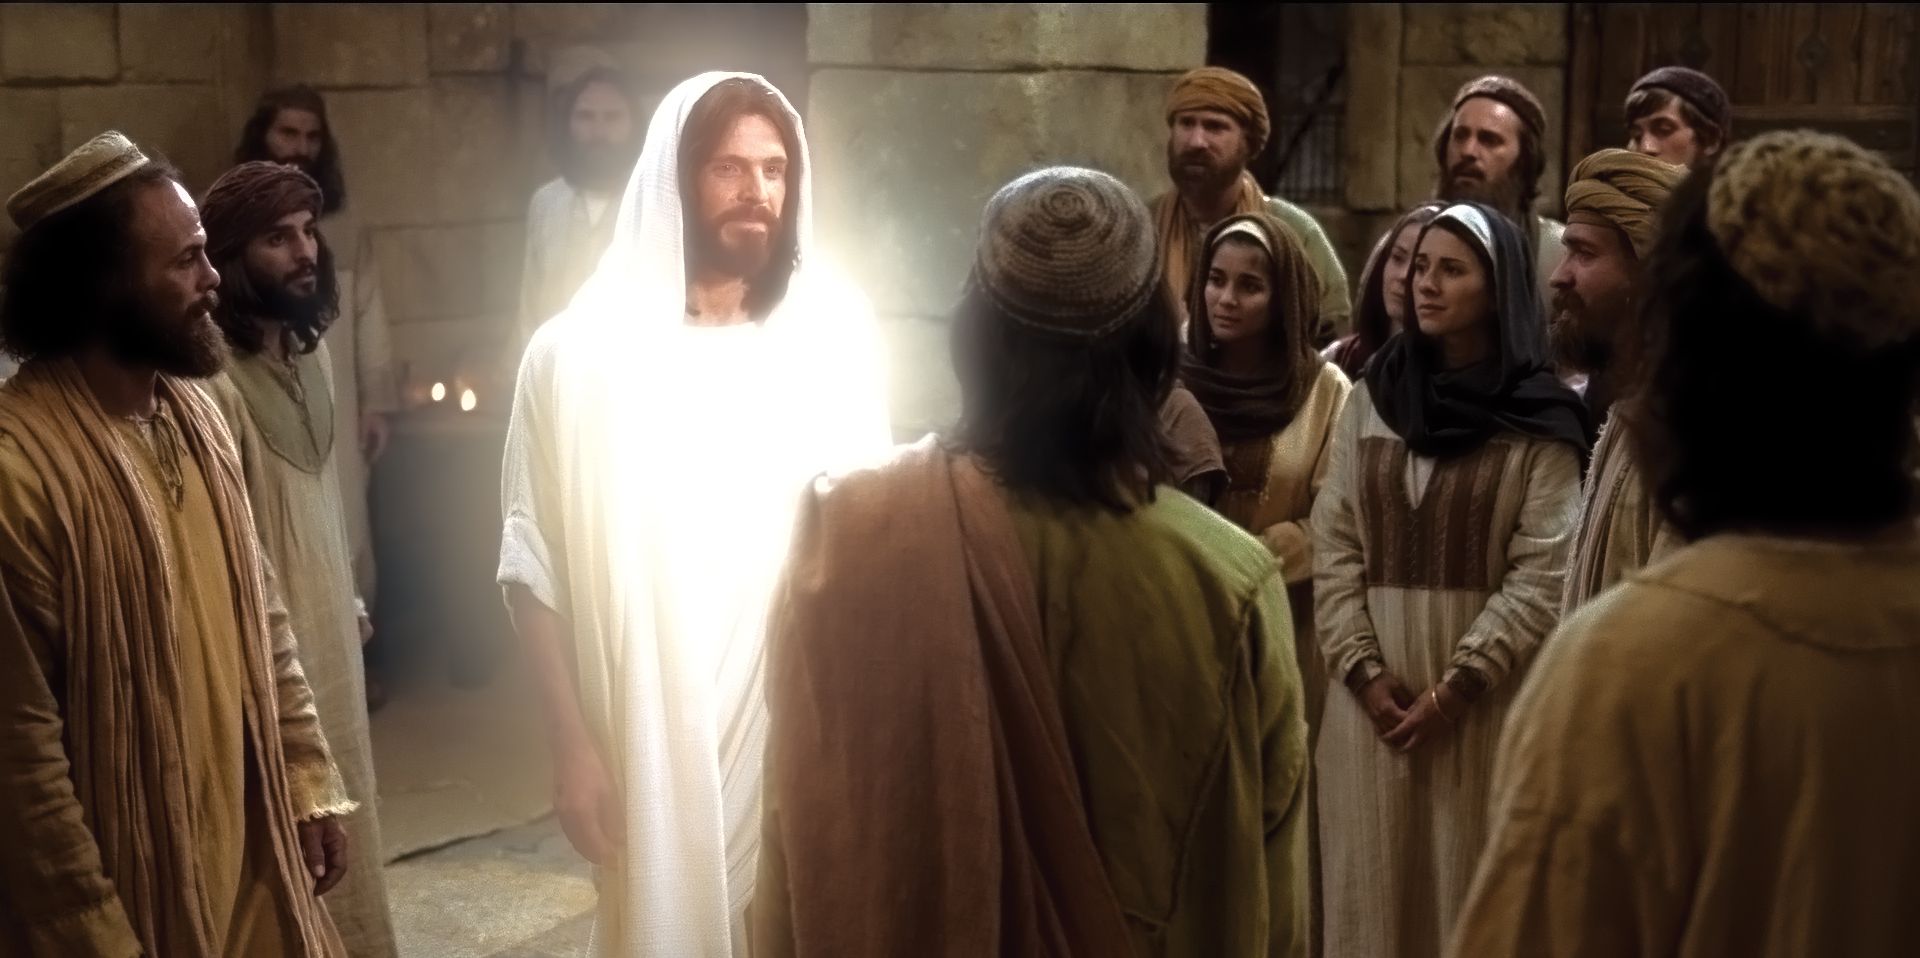 After His Resurrection, Christ appears to His disciples.